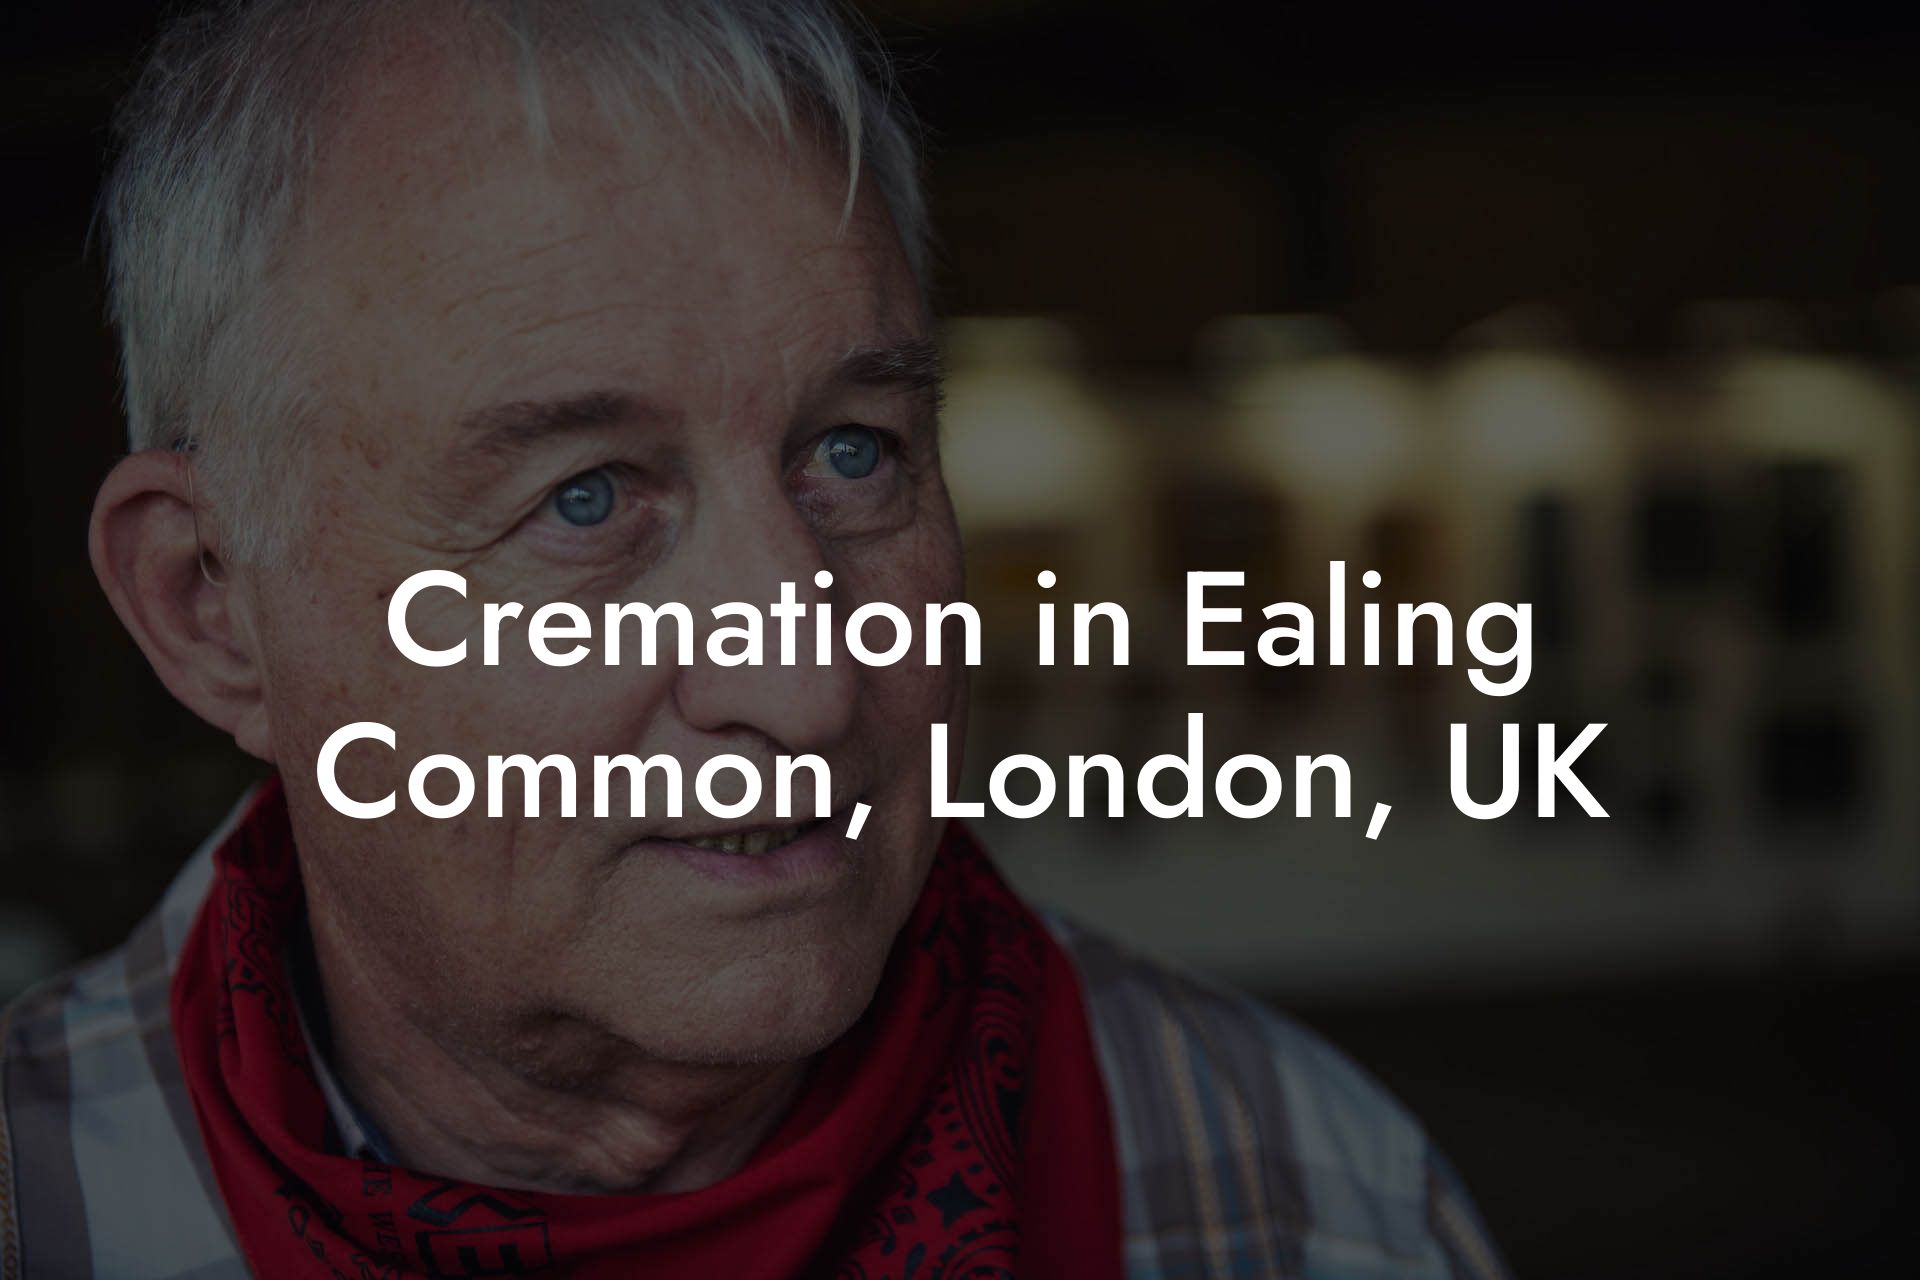 Cremation in Ealing Common, London, UK